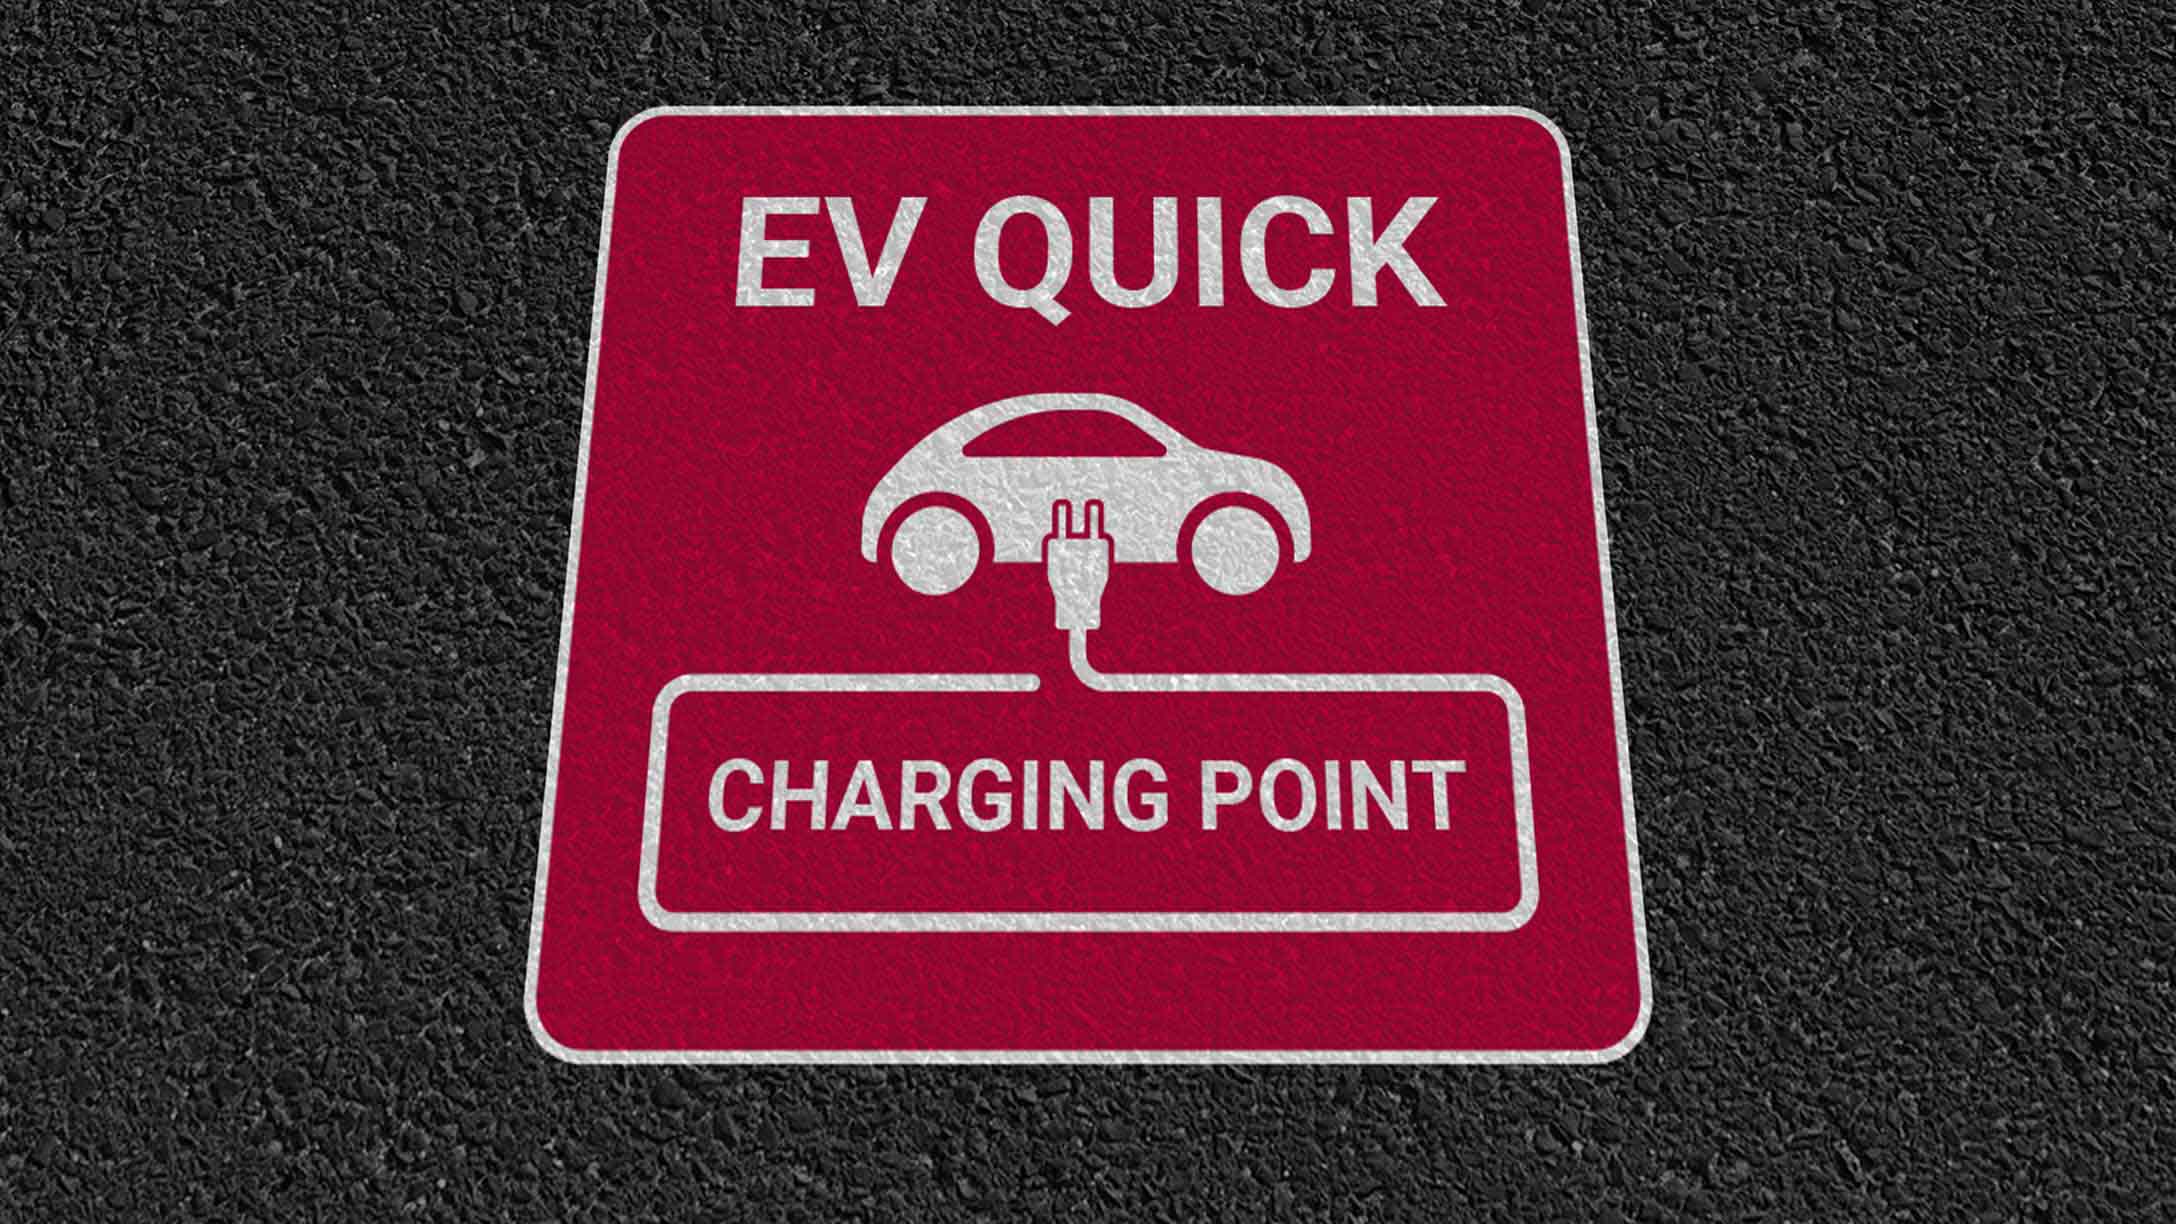 Red sign that says 'EV QUICK Charing Point' with electric vehicle icon